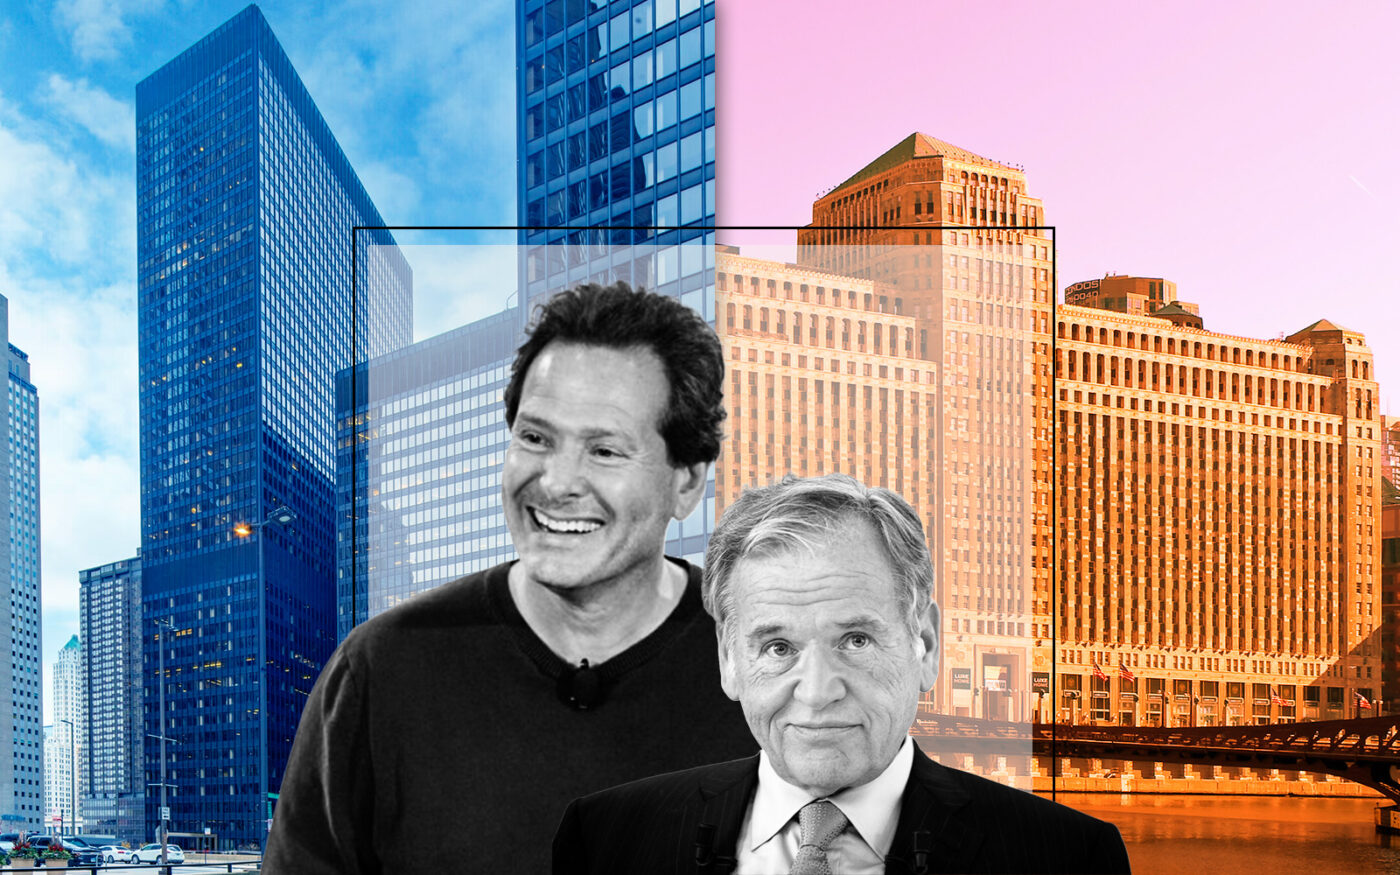 PayPal CEO Dan Schulman and Omnicom Group CEO John Wren with 225 North Michigan Avenue and 222 West Merchandise Mart Plaza